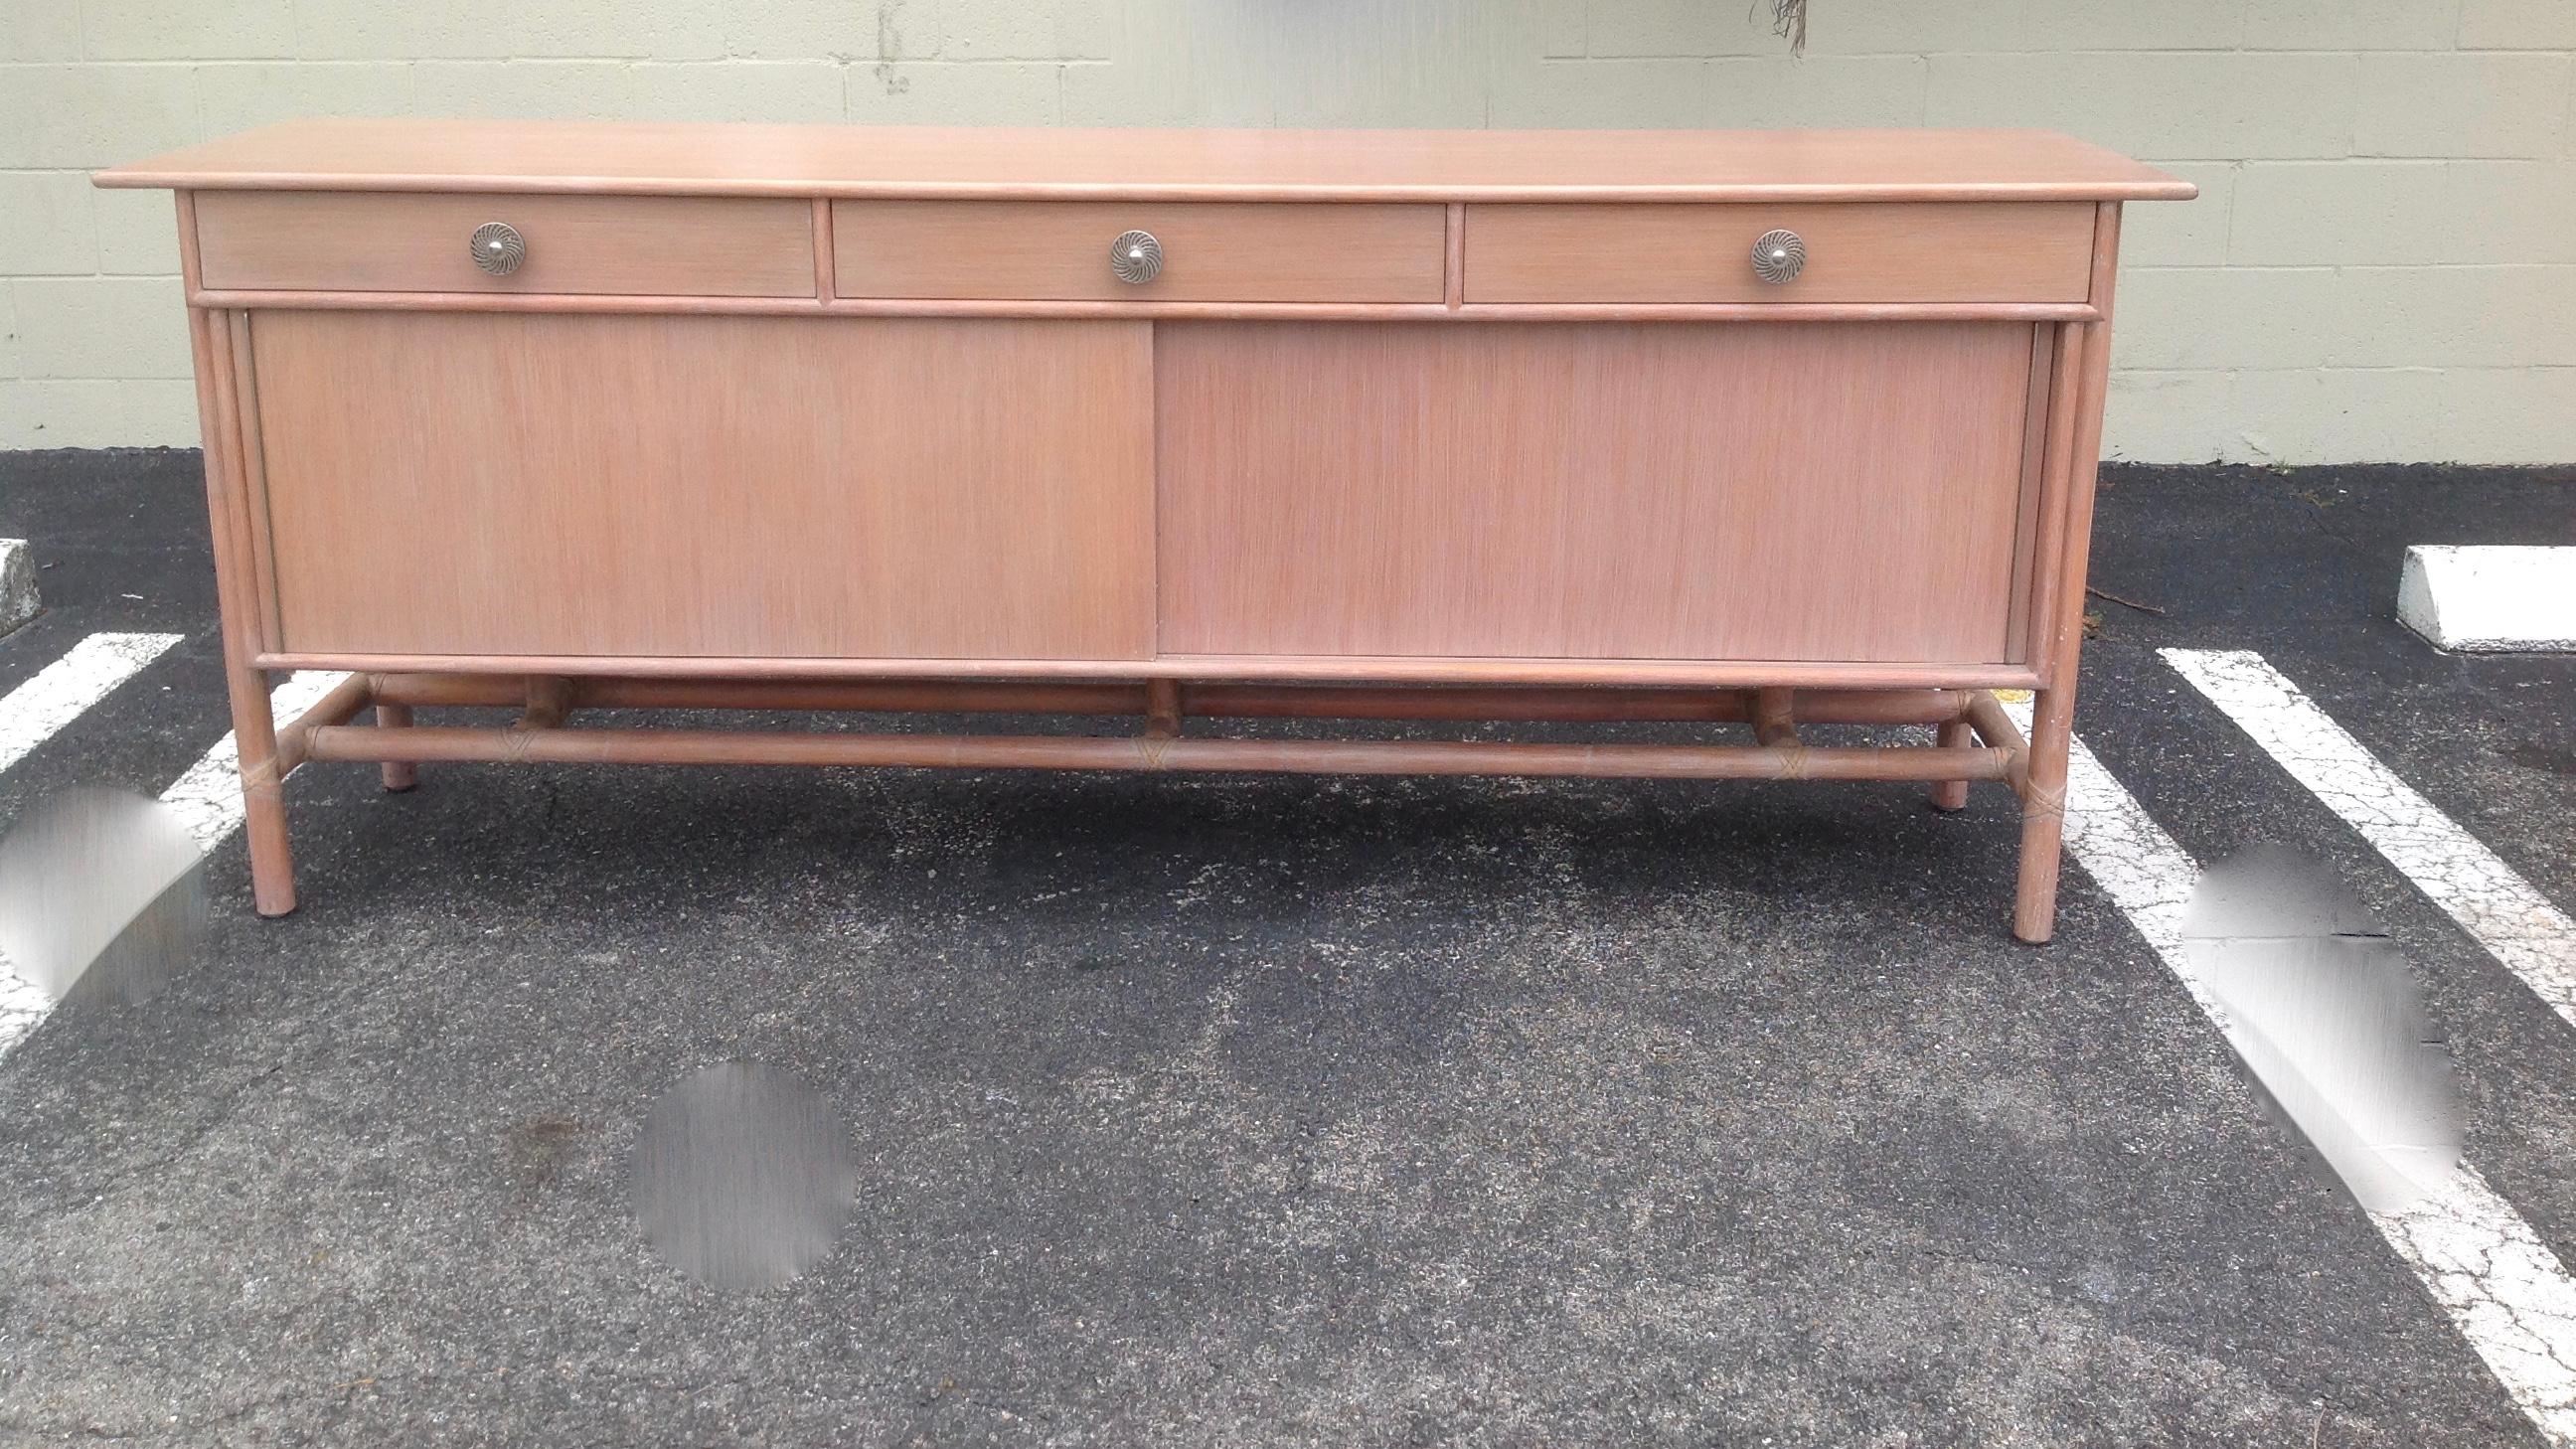 Credenza or buffet for Baker's McGuire division features leather-wrapped bamboo legs and trim. It is accented with a 